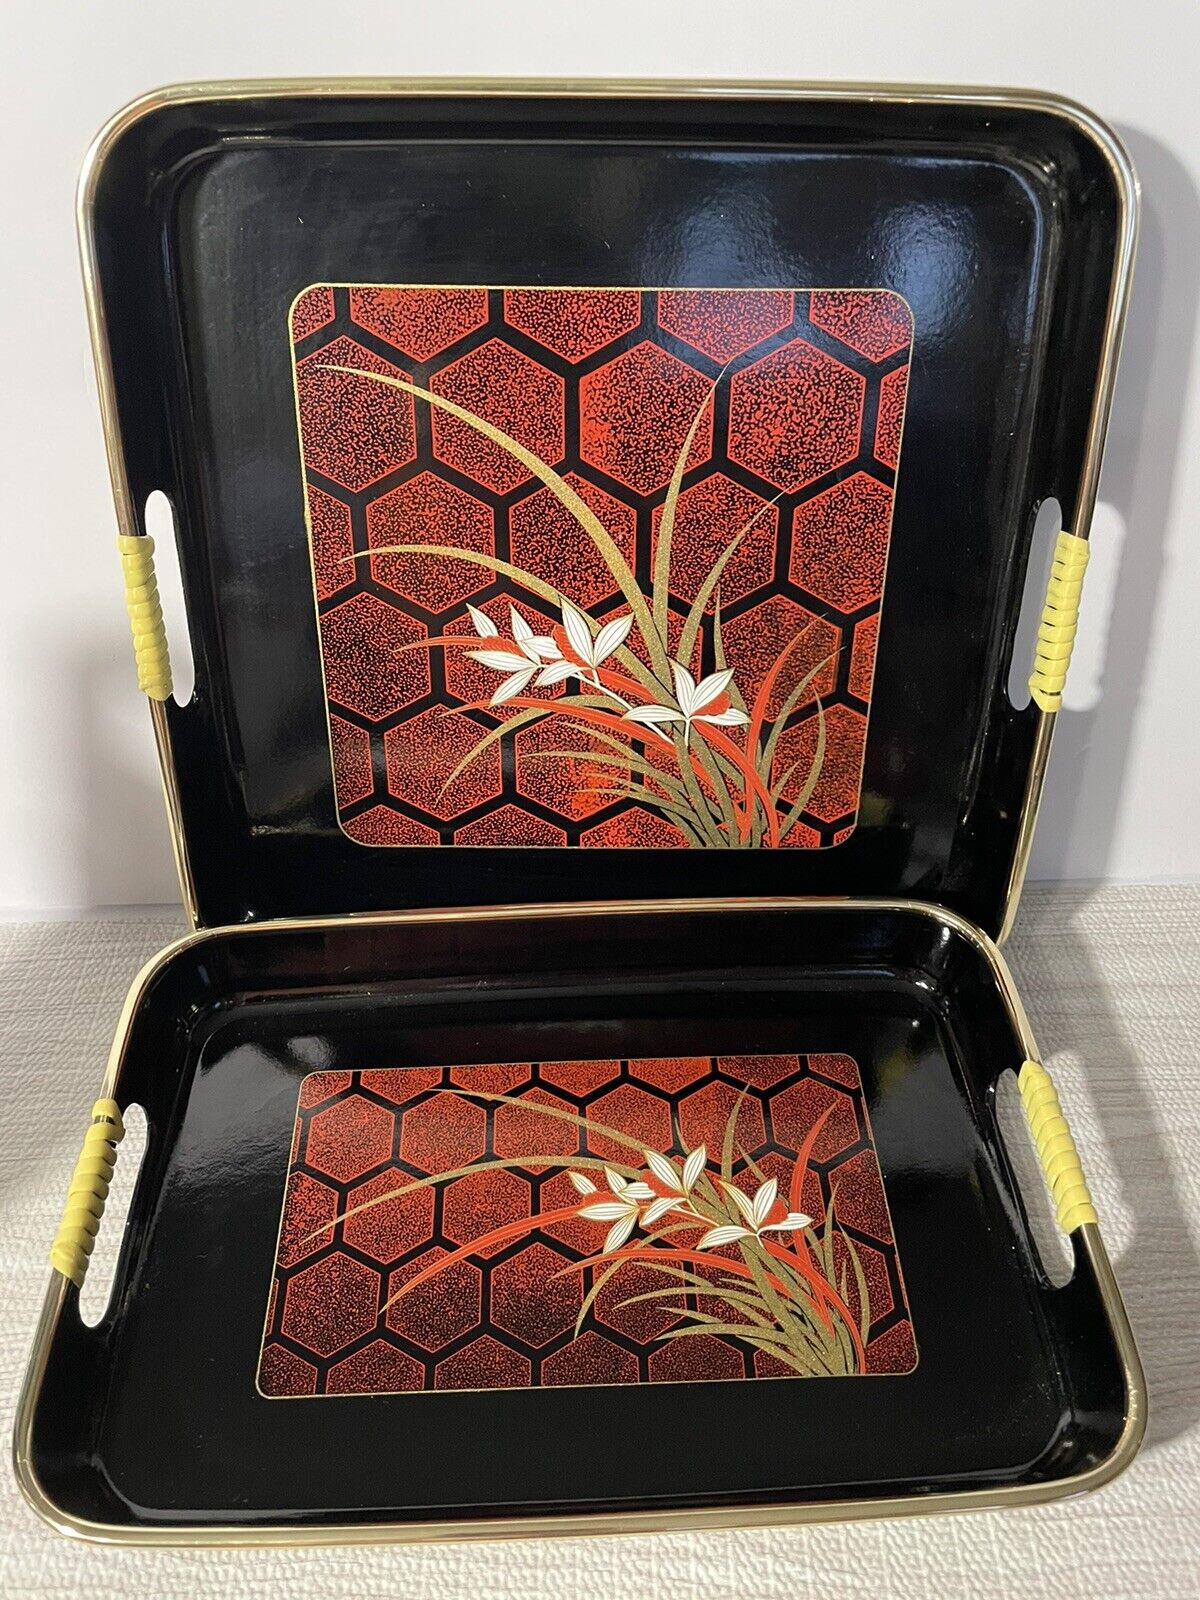 Vintage Lacquerware Set Of 2 Serving Trays Japan Wheat/glass Red Black Gold